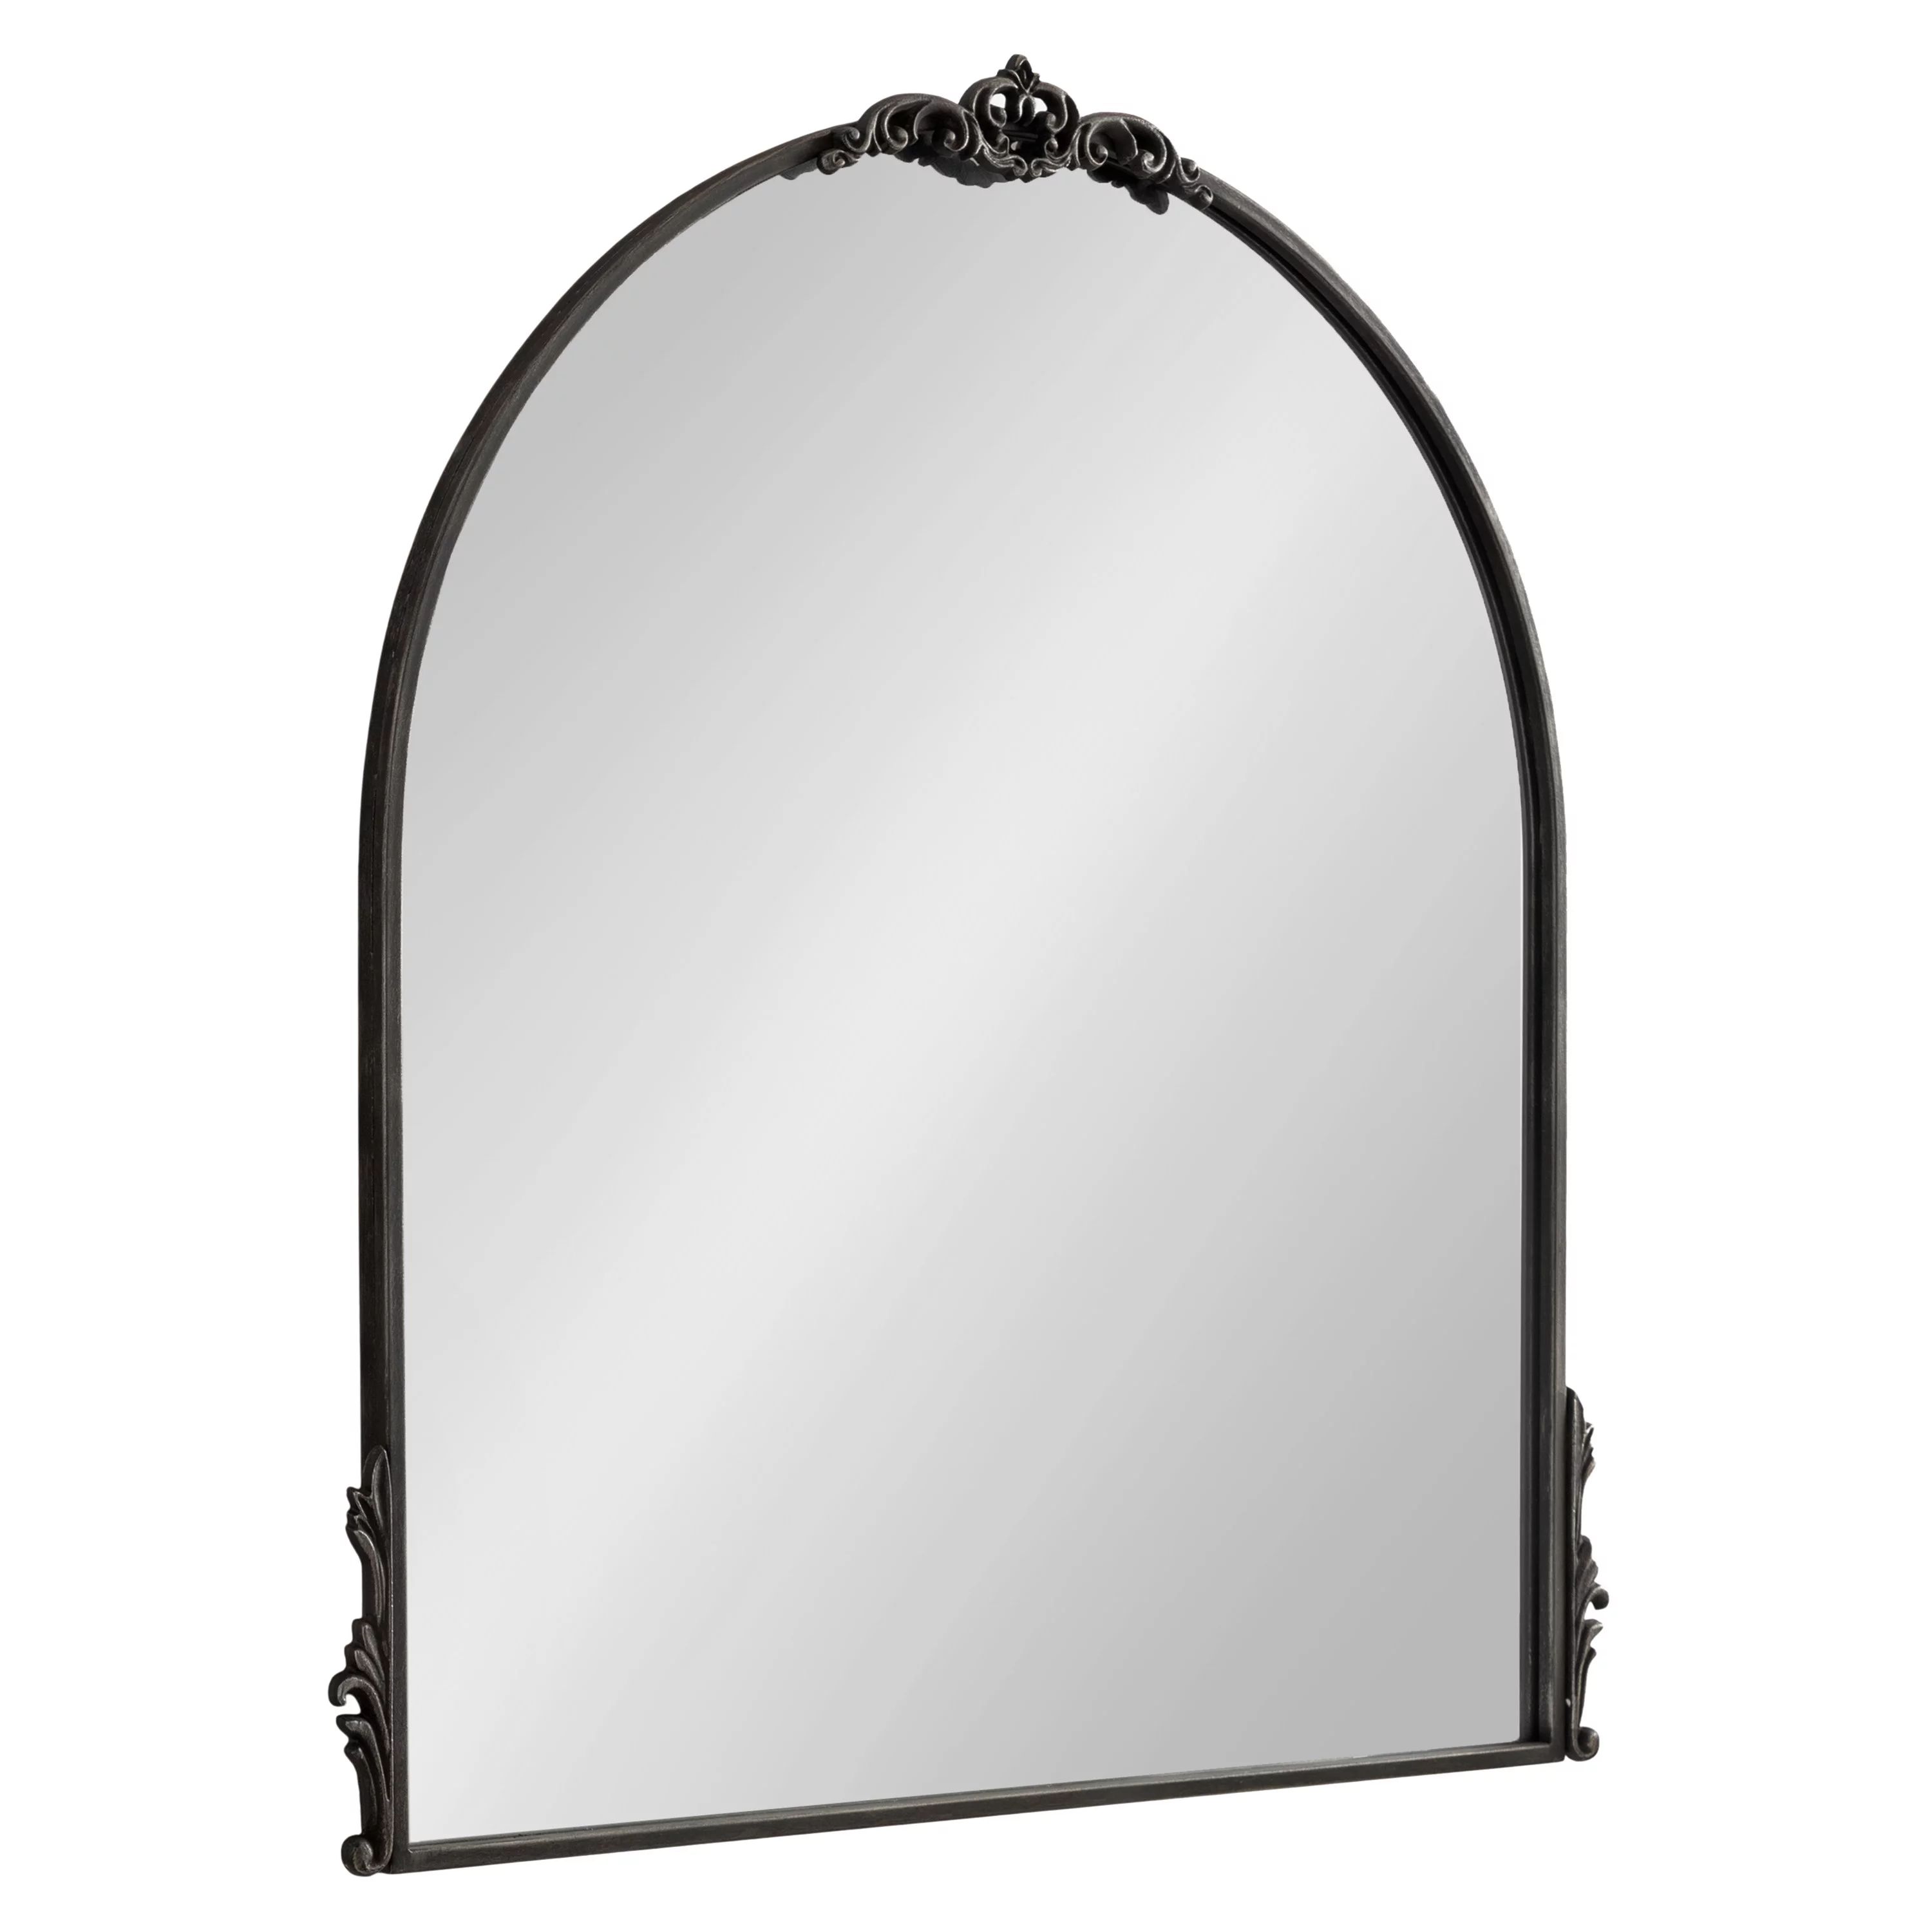 Kate and Laurel Myrcelle Traditional Arched Mirror, 30 x 32, Black, Decorative Large Arch Mirror ... | Walmart (US)